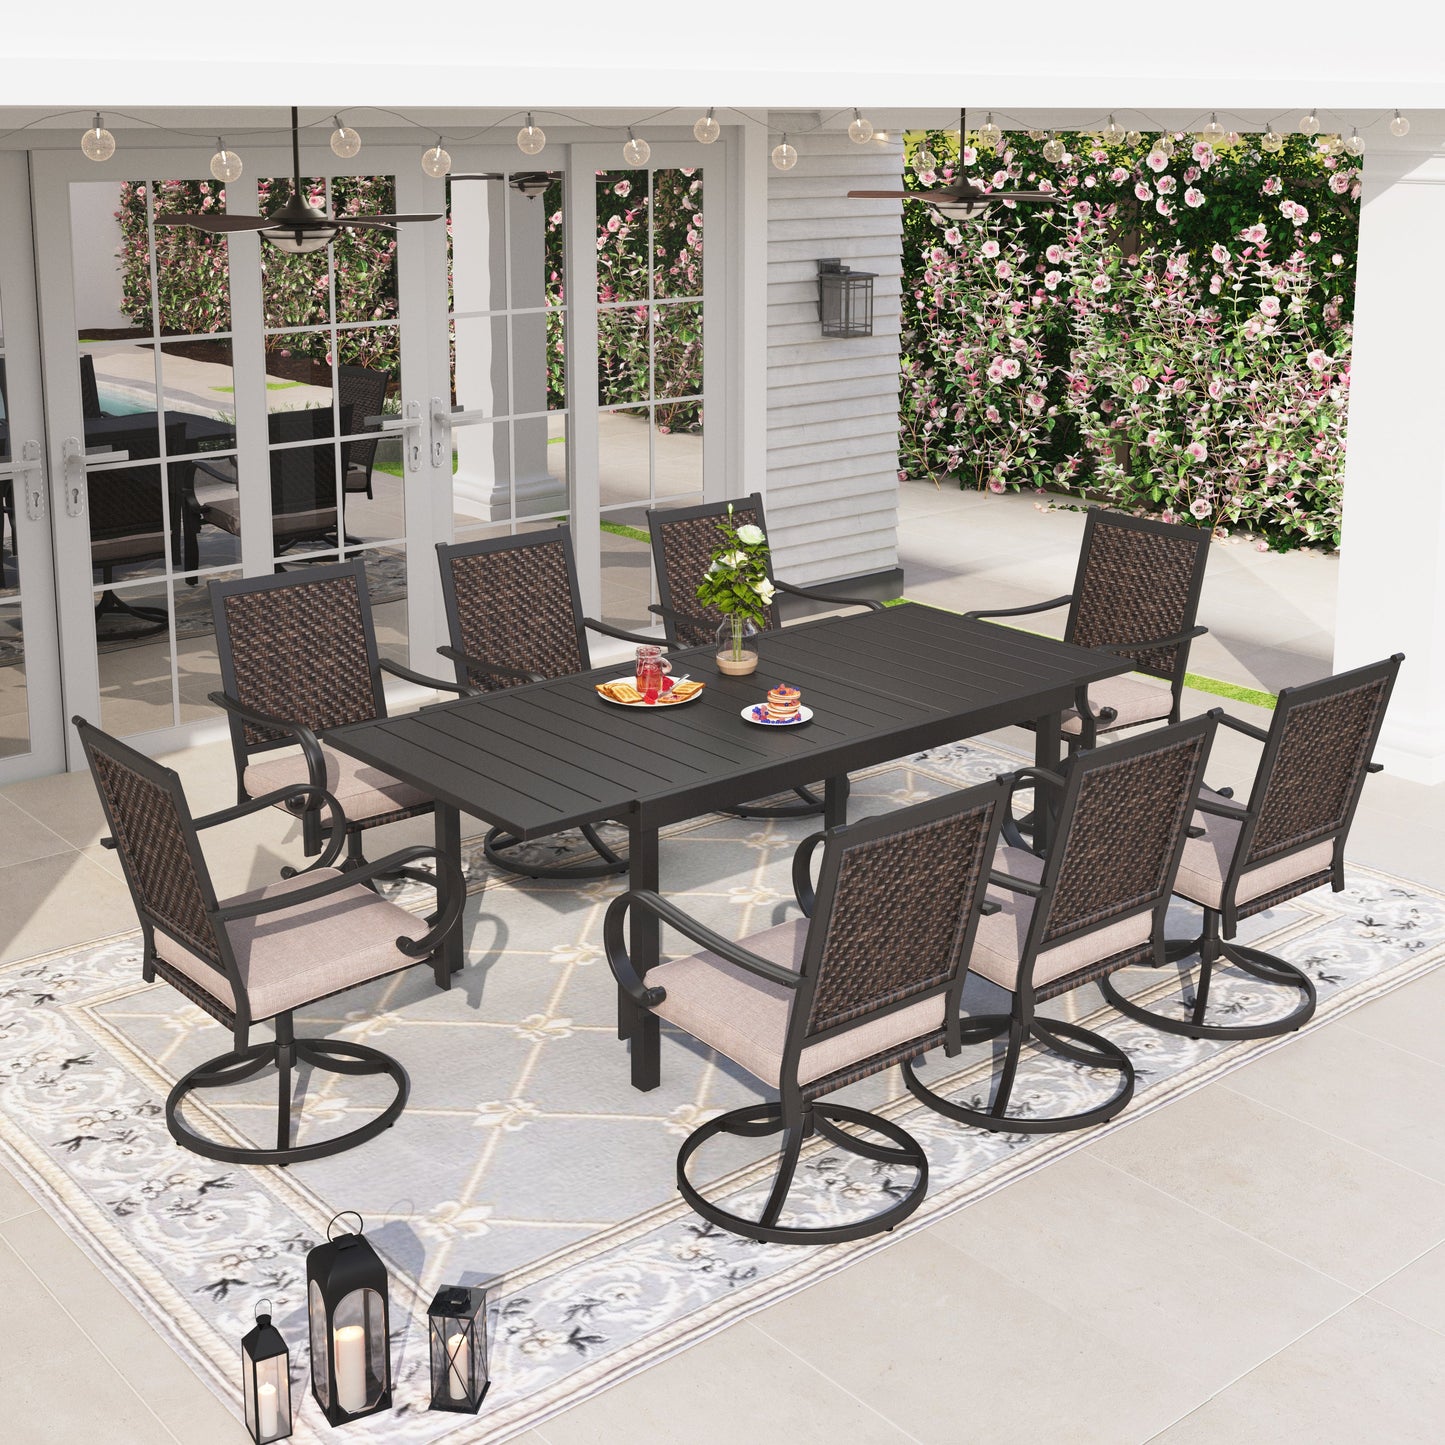 Sophia & William 9 Pieces Outdoor Patio Dining Set Wicker Swivel Chairs and Steel Table